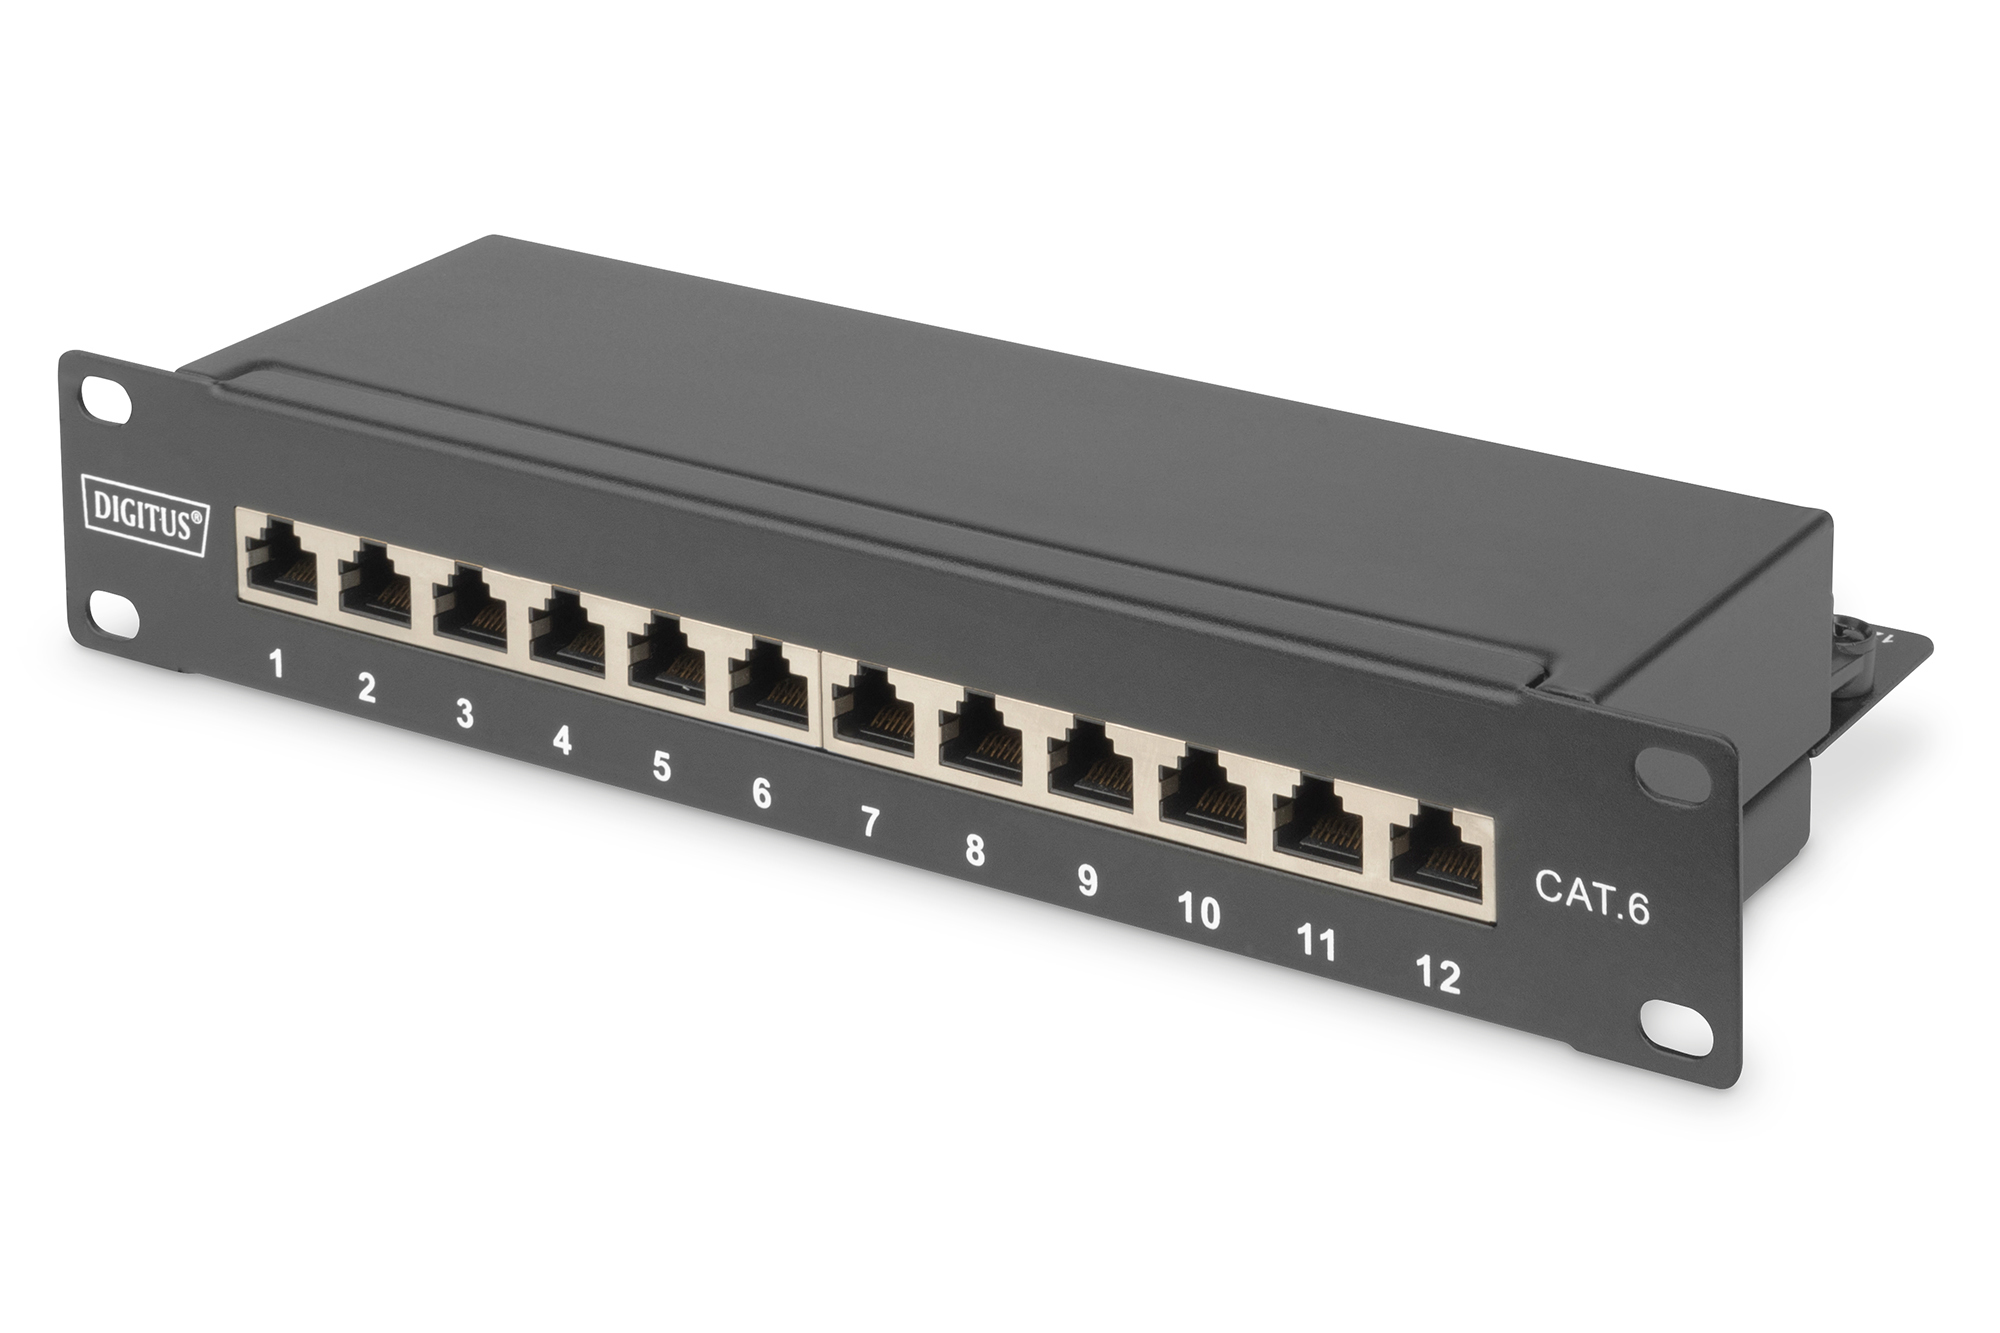 Photos - Other network equipment Digitus CAT 6, Class E Patch Panel, shielded, black DN-91612S 